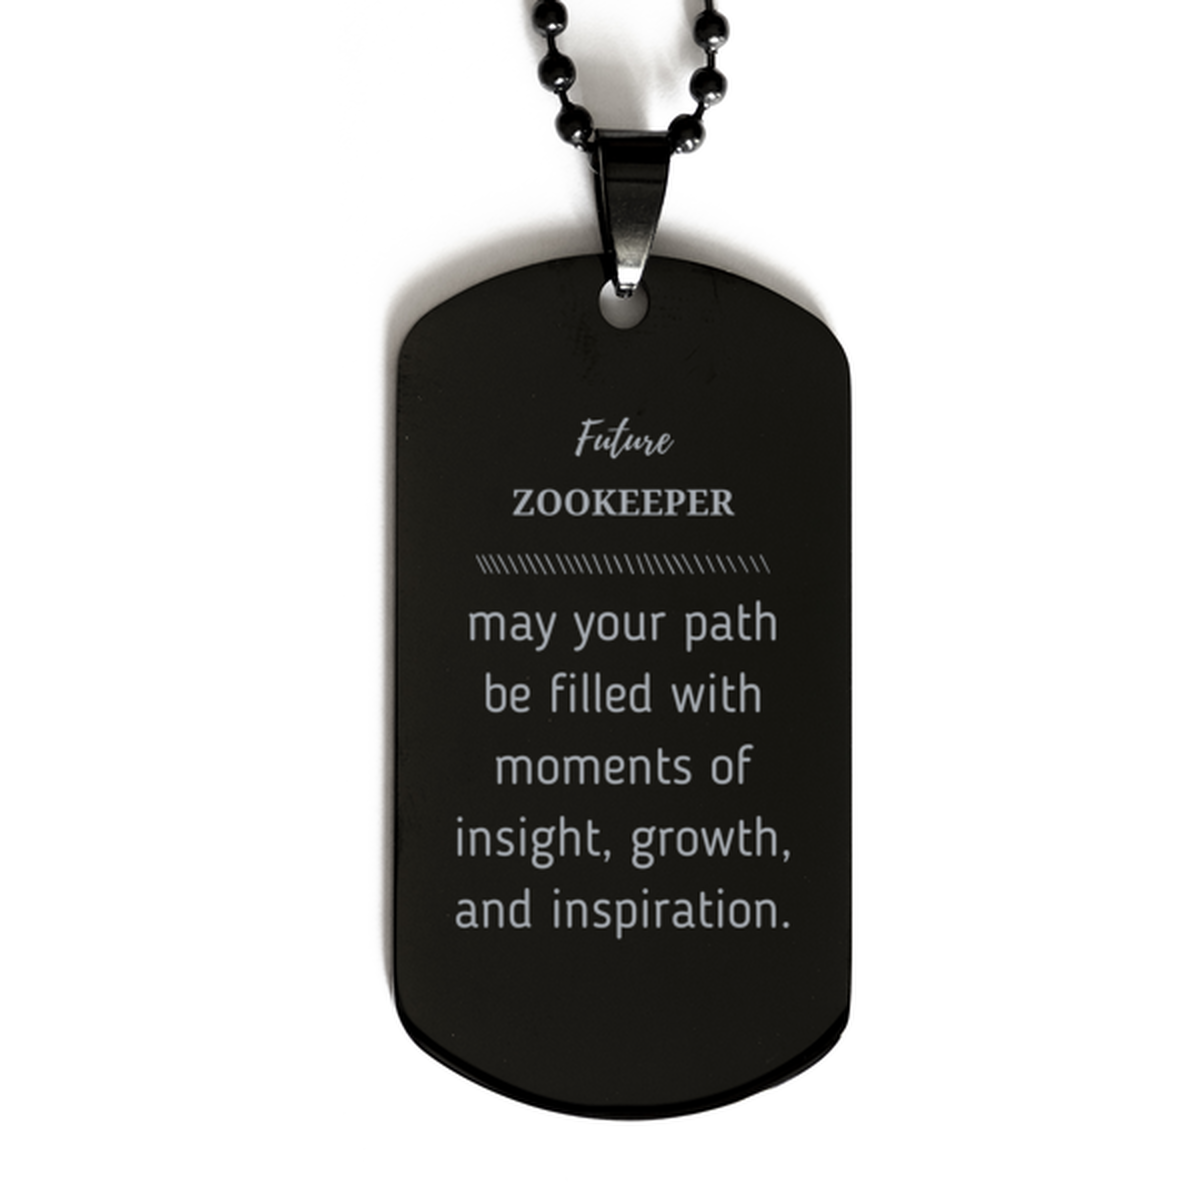 Future Zookeeper Gifts, May your path be filled with moments of insight, Graduation Gifts for New Zookeeper, Christmas Unique Black Dog Tag For Men, Women, Friends